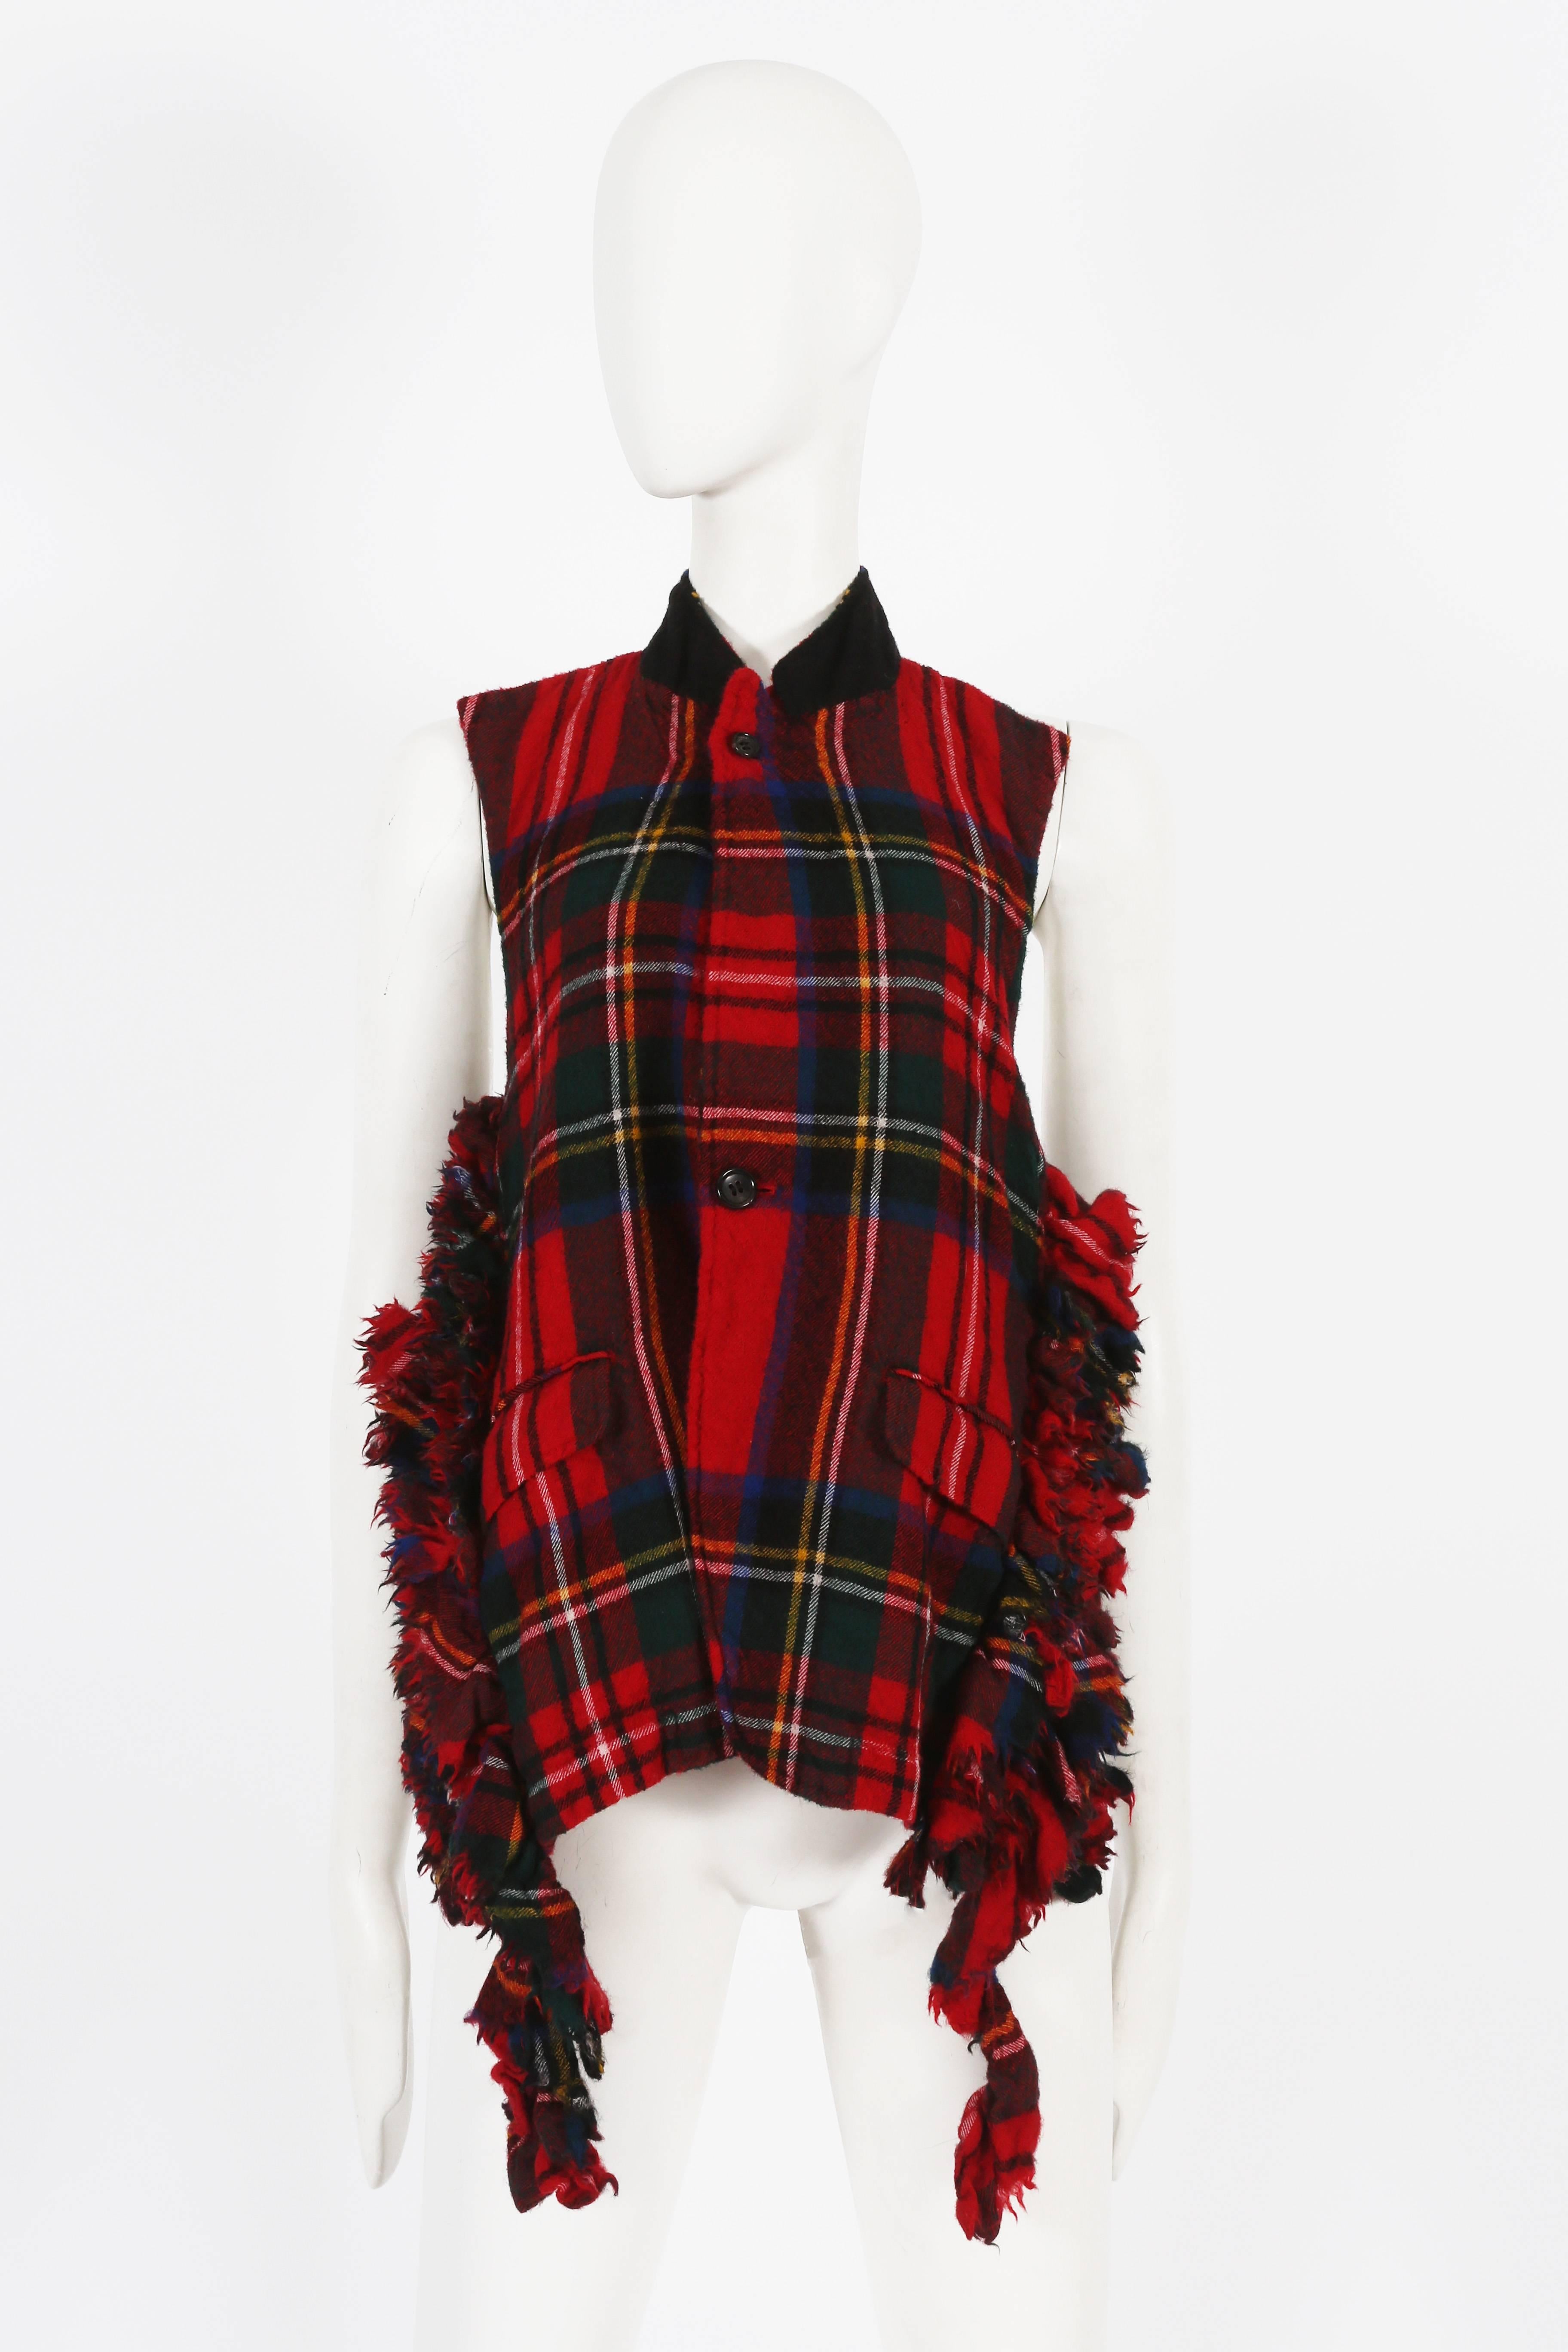 Presenting a rare Comme des Garcons red tartan boiled wool waistcoat, a true collector's gem from the autumn-winter 2000 collection. This waistcoat showcases the brand's signature creativity and unique design.

Crafted from boiled wool in a striking